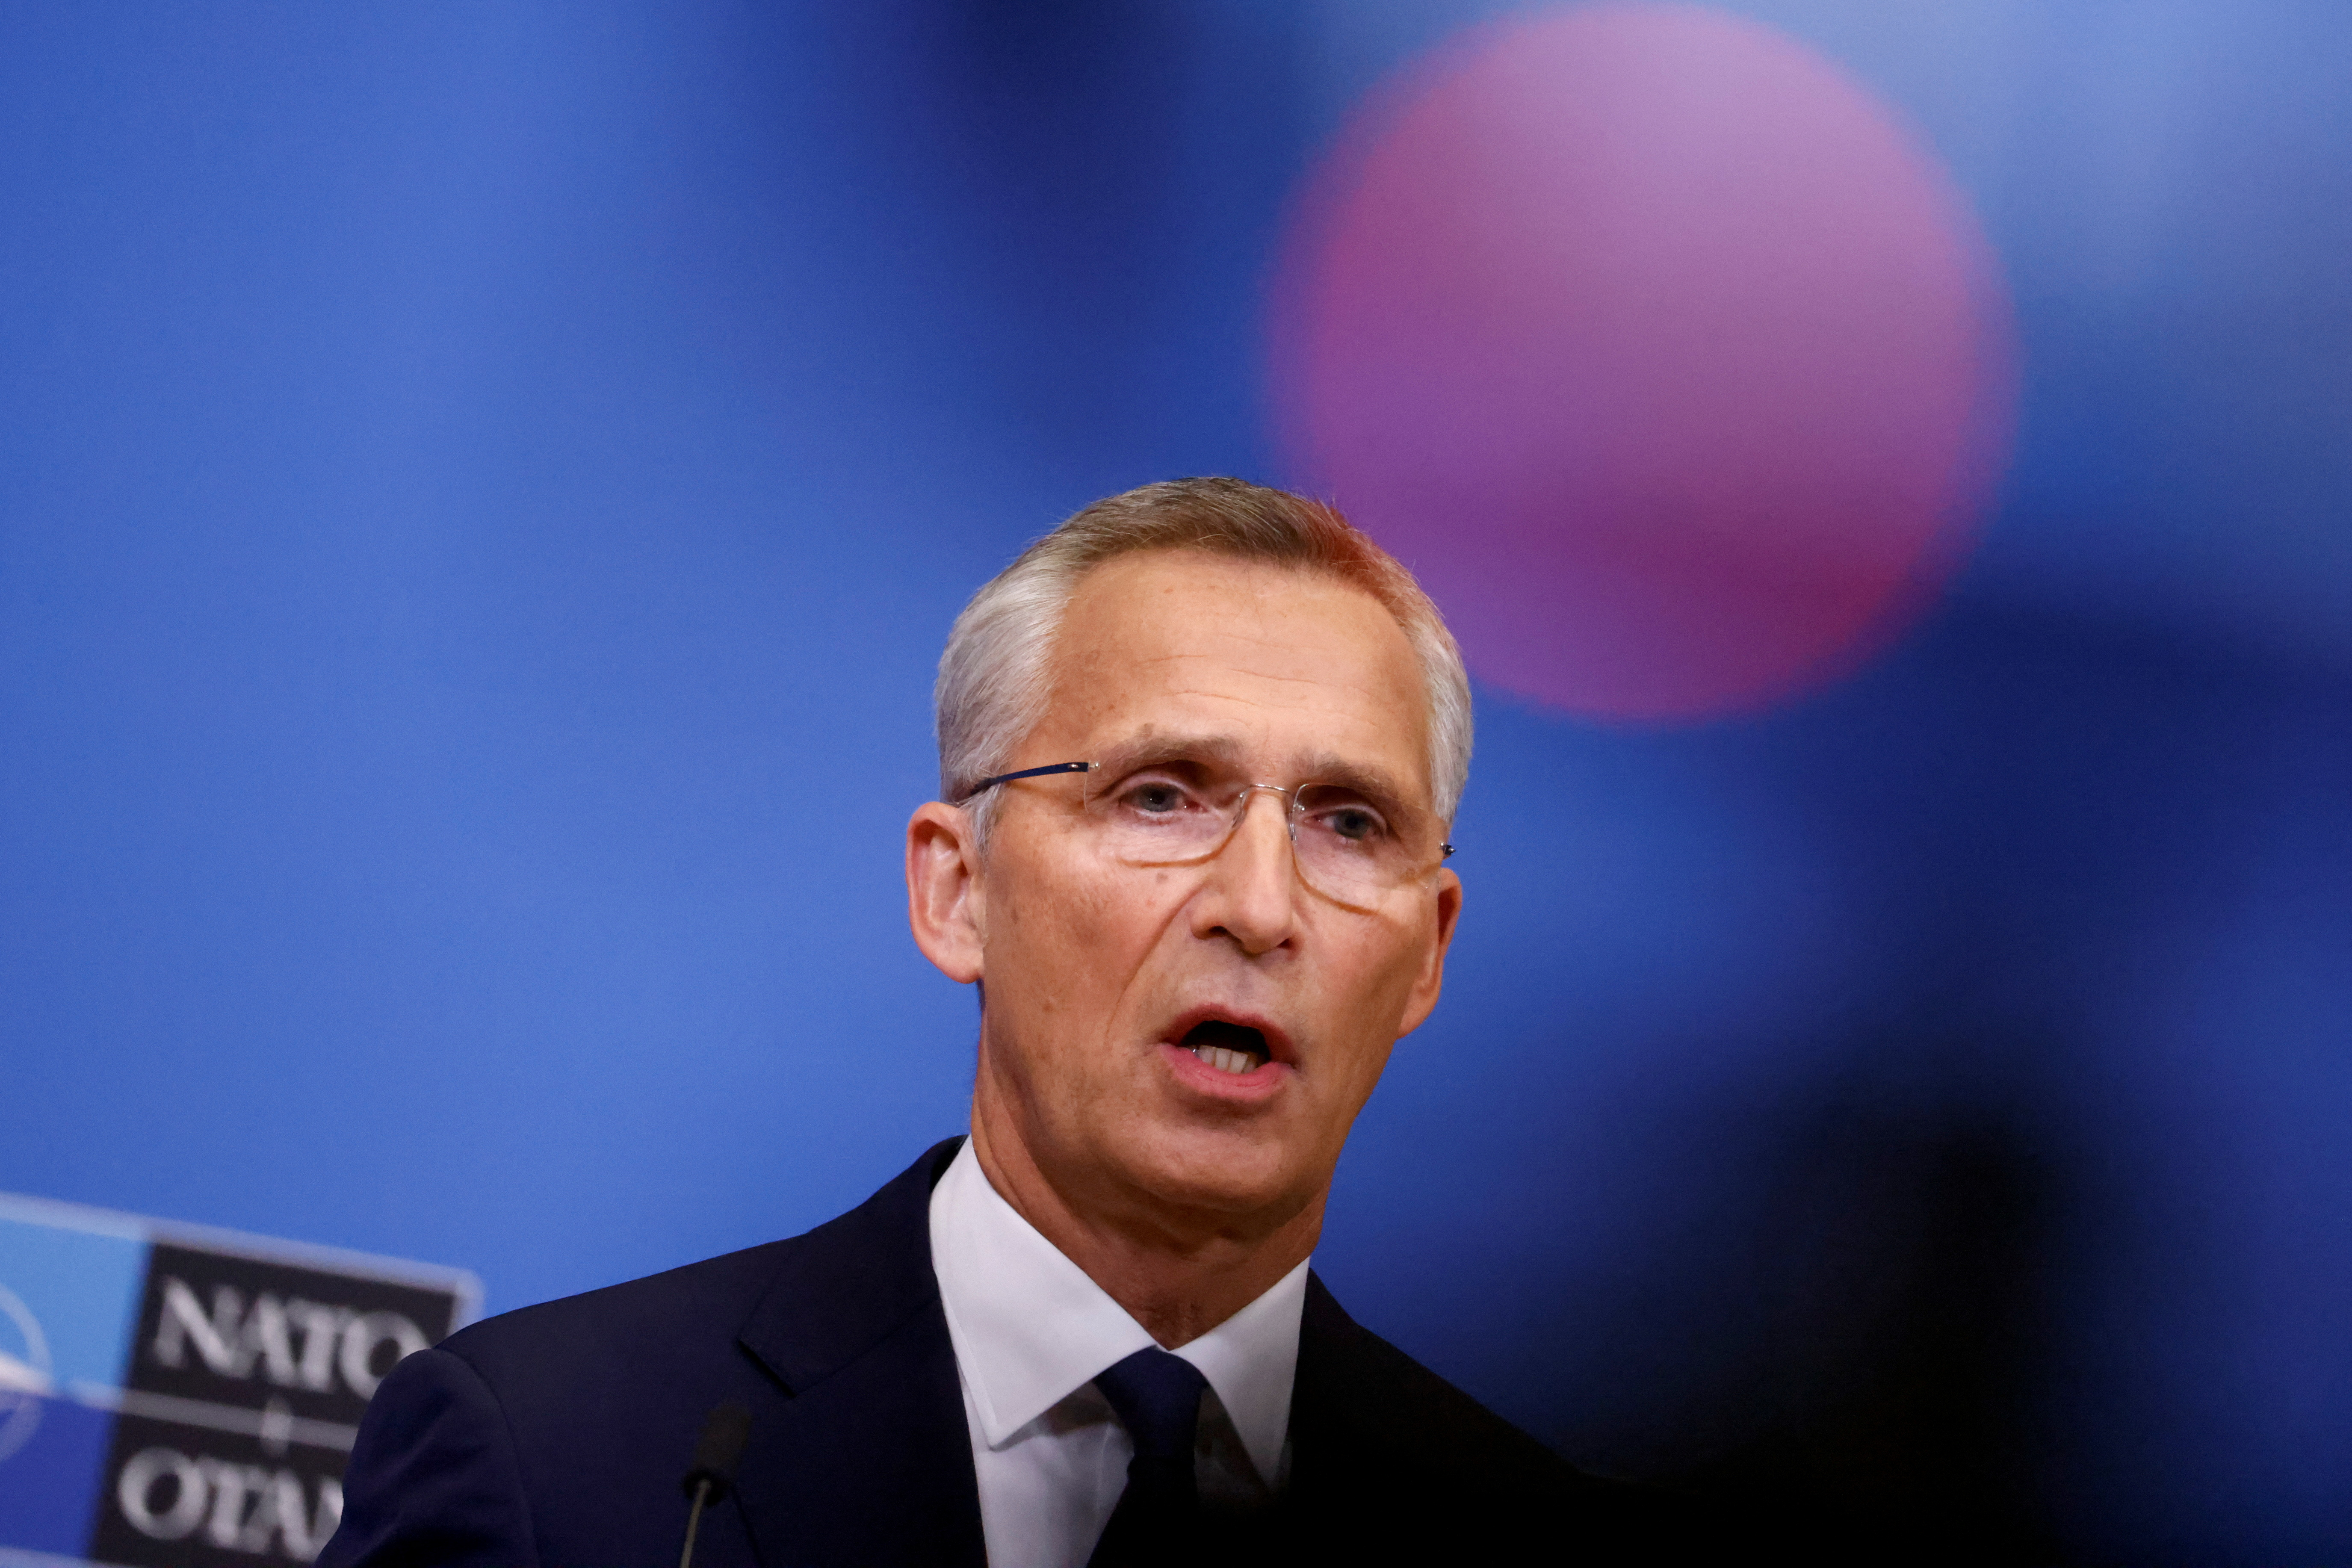 NATO Secretary General Stoltenberg gives a news conference, in Brussels